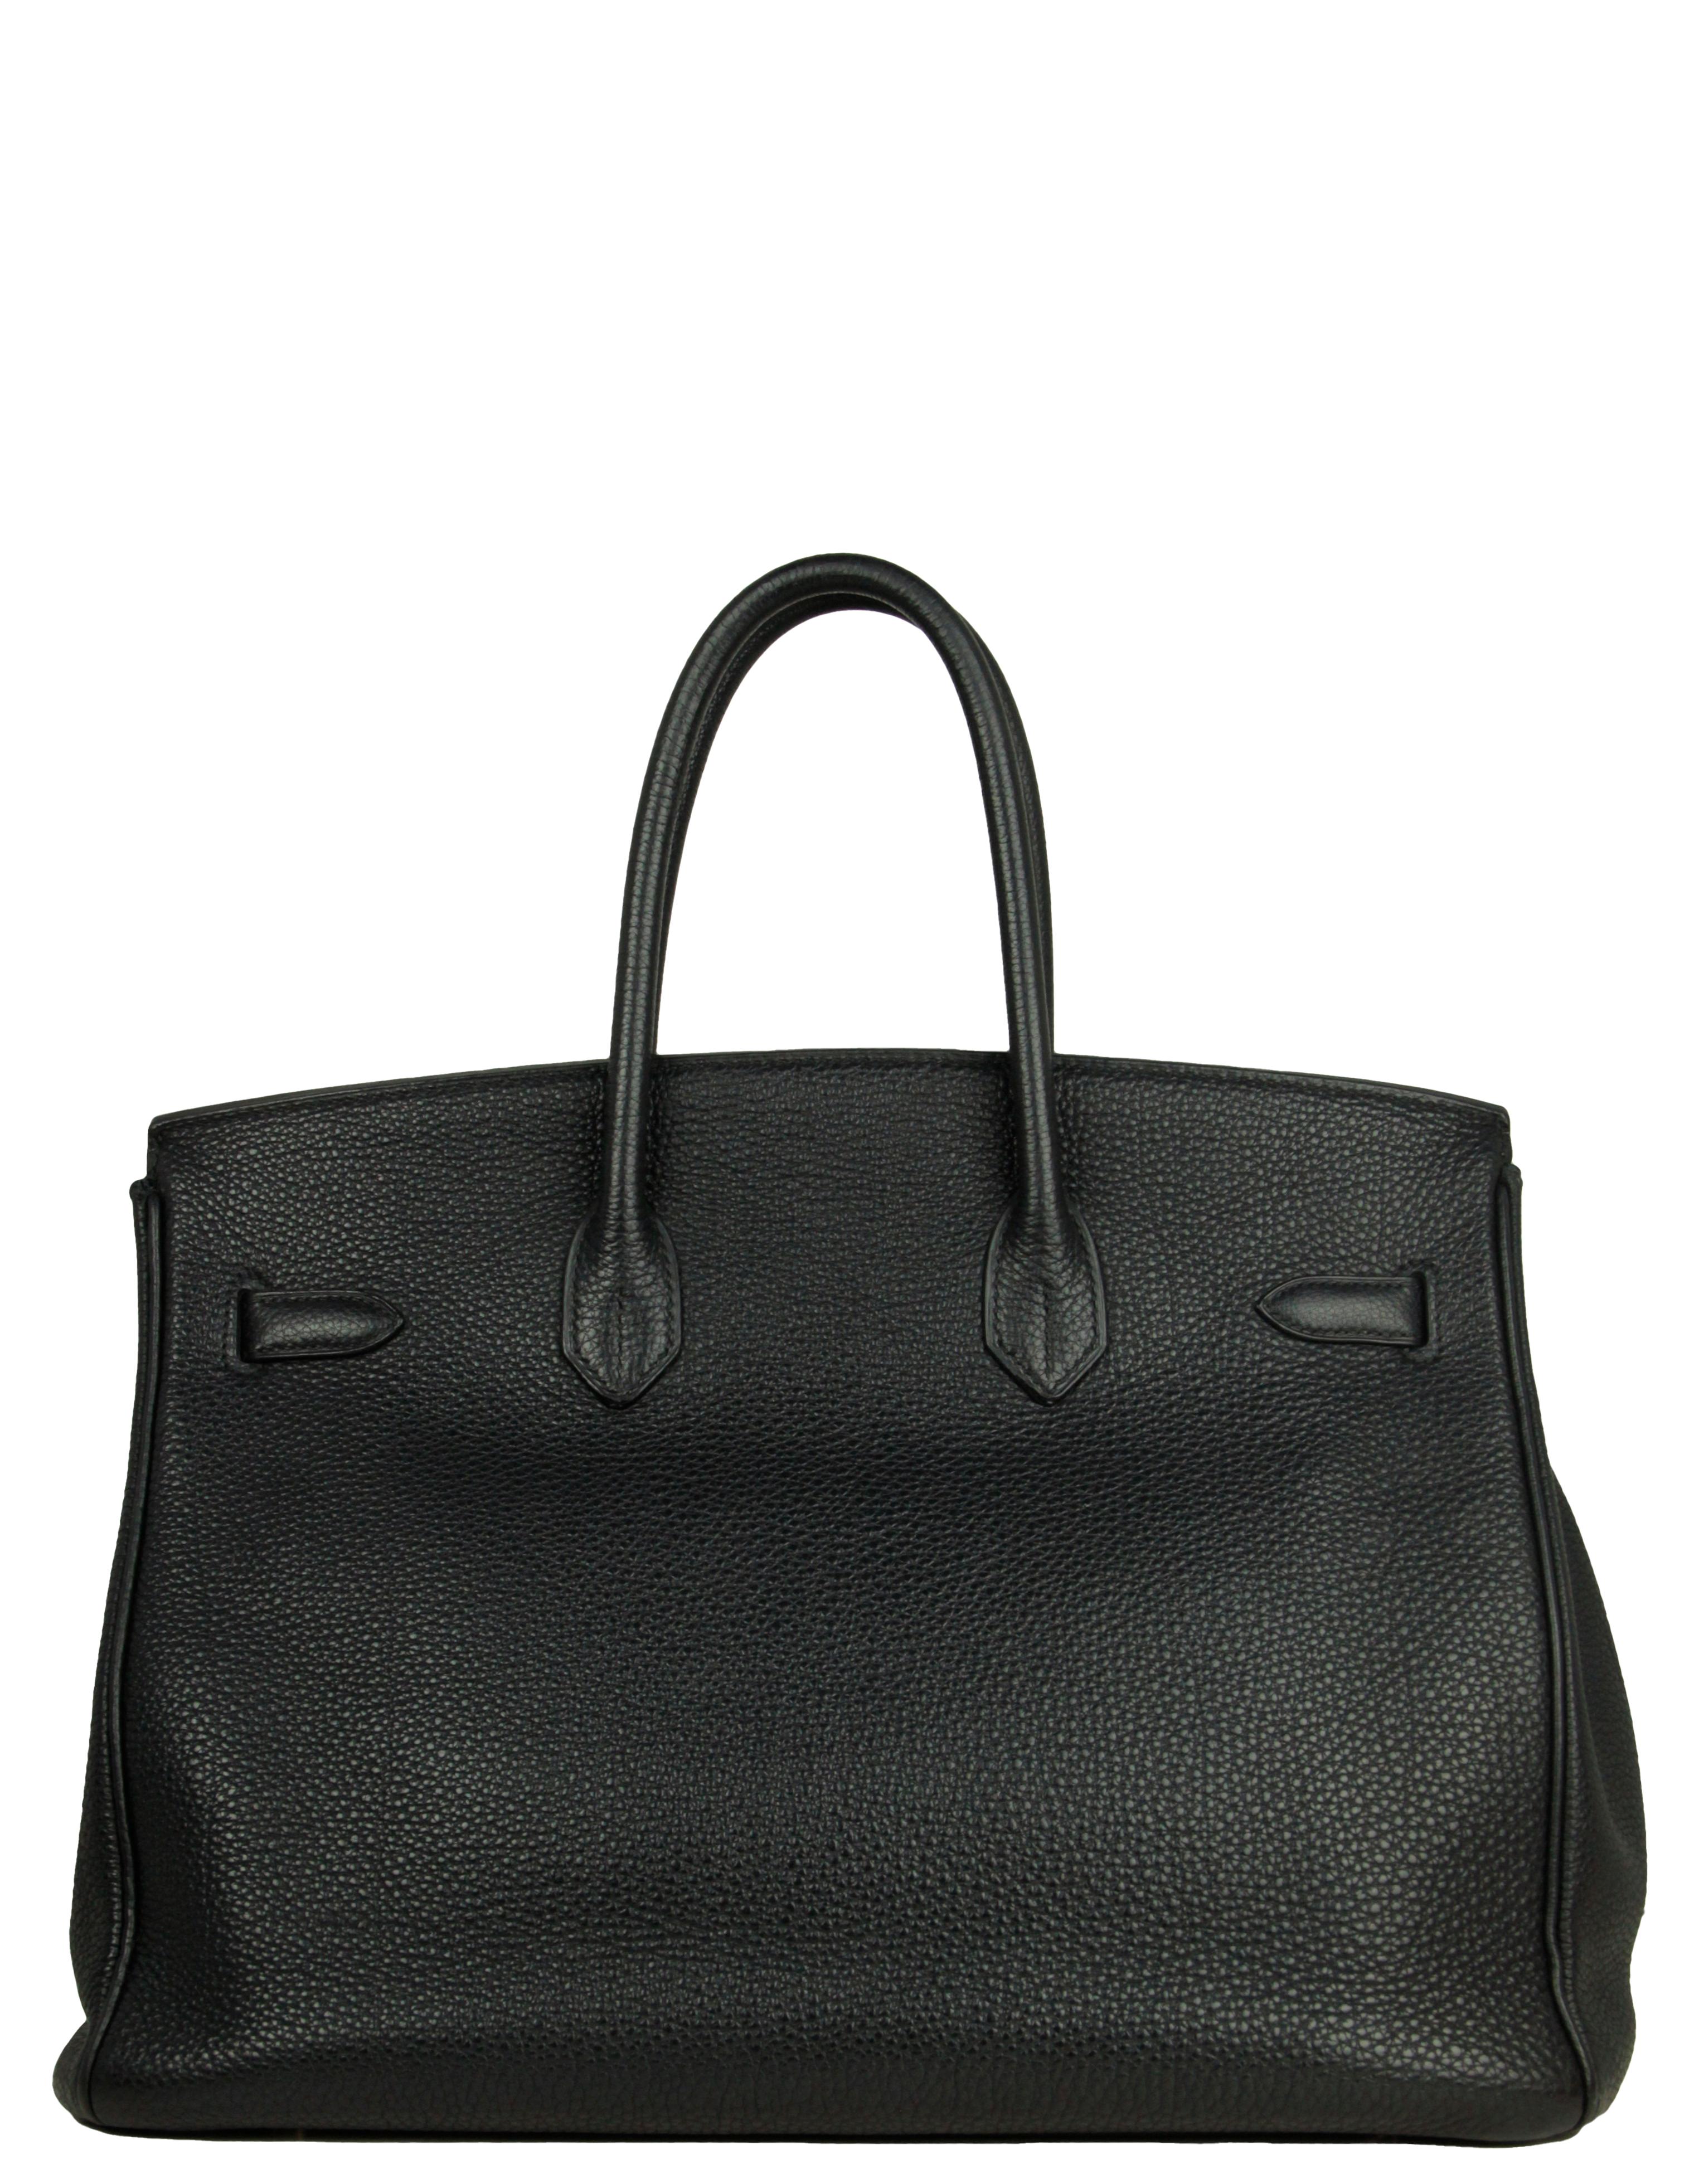 Hermes Black Togo Leather 35cm Birkin Bag GHW In Good Condition For Sale In New York, NY